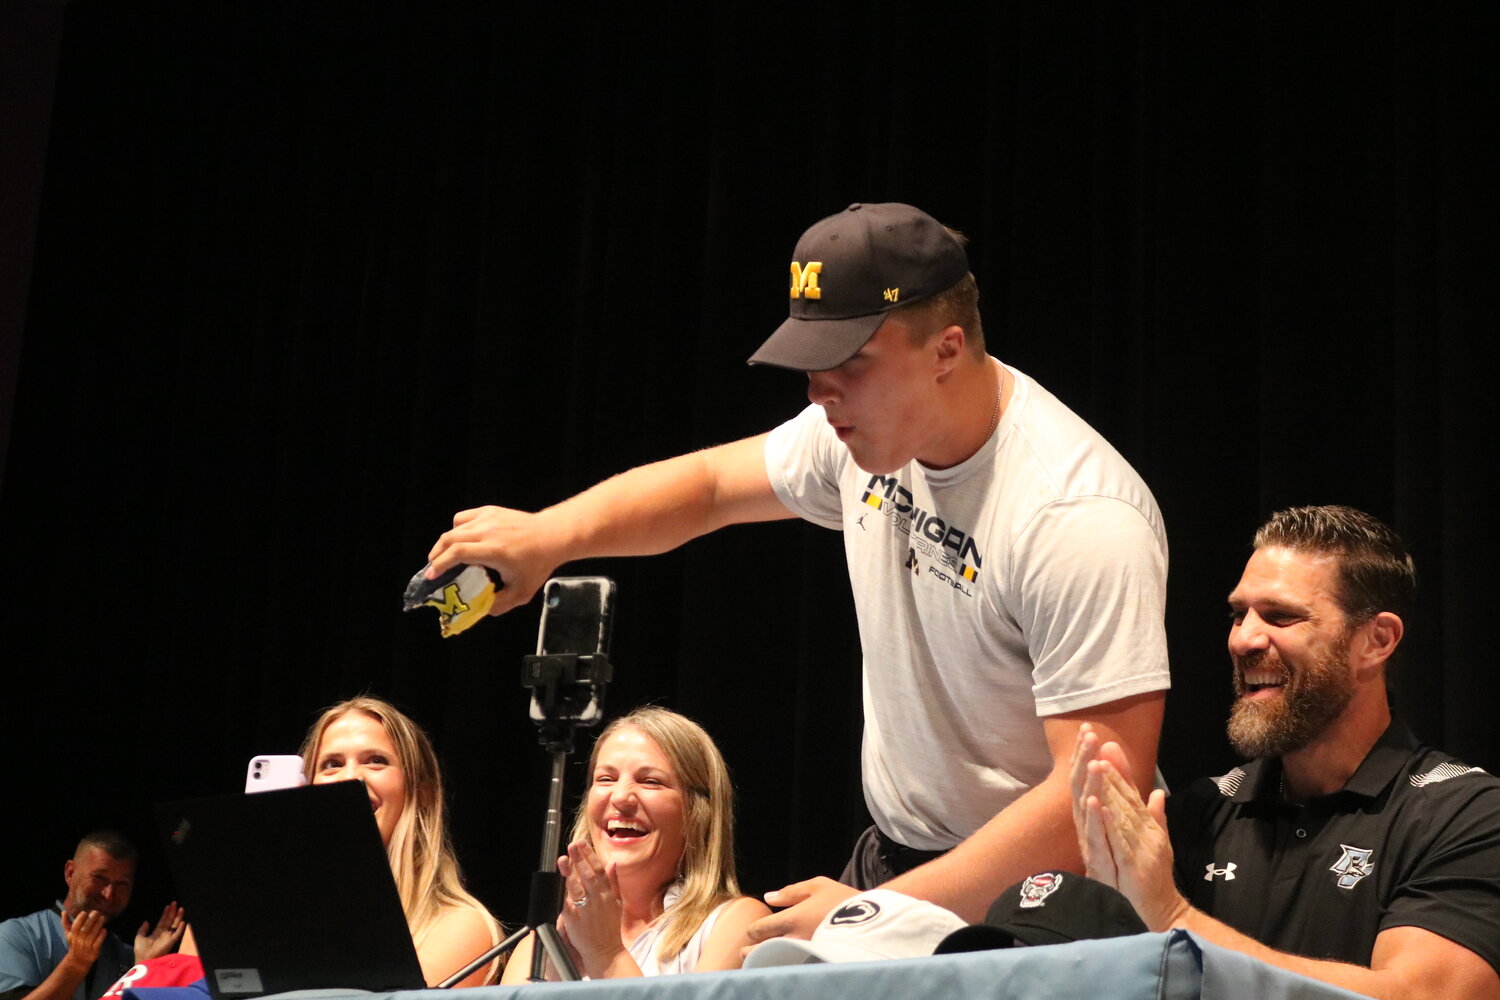 Jake Guarnera took a bite out of a Michigan frosted donut to celebrate his decision.